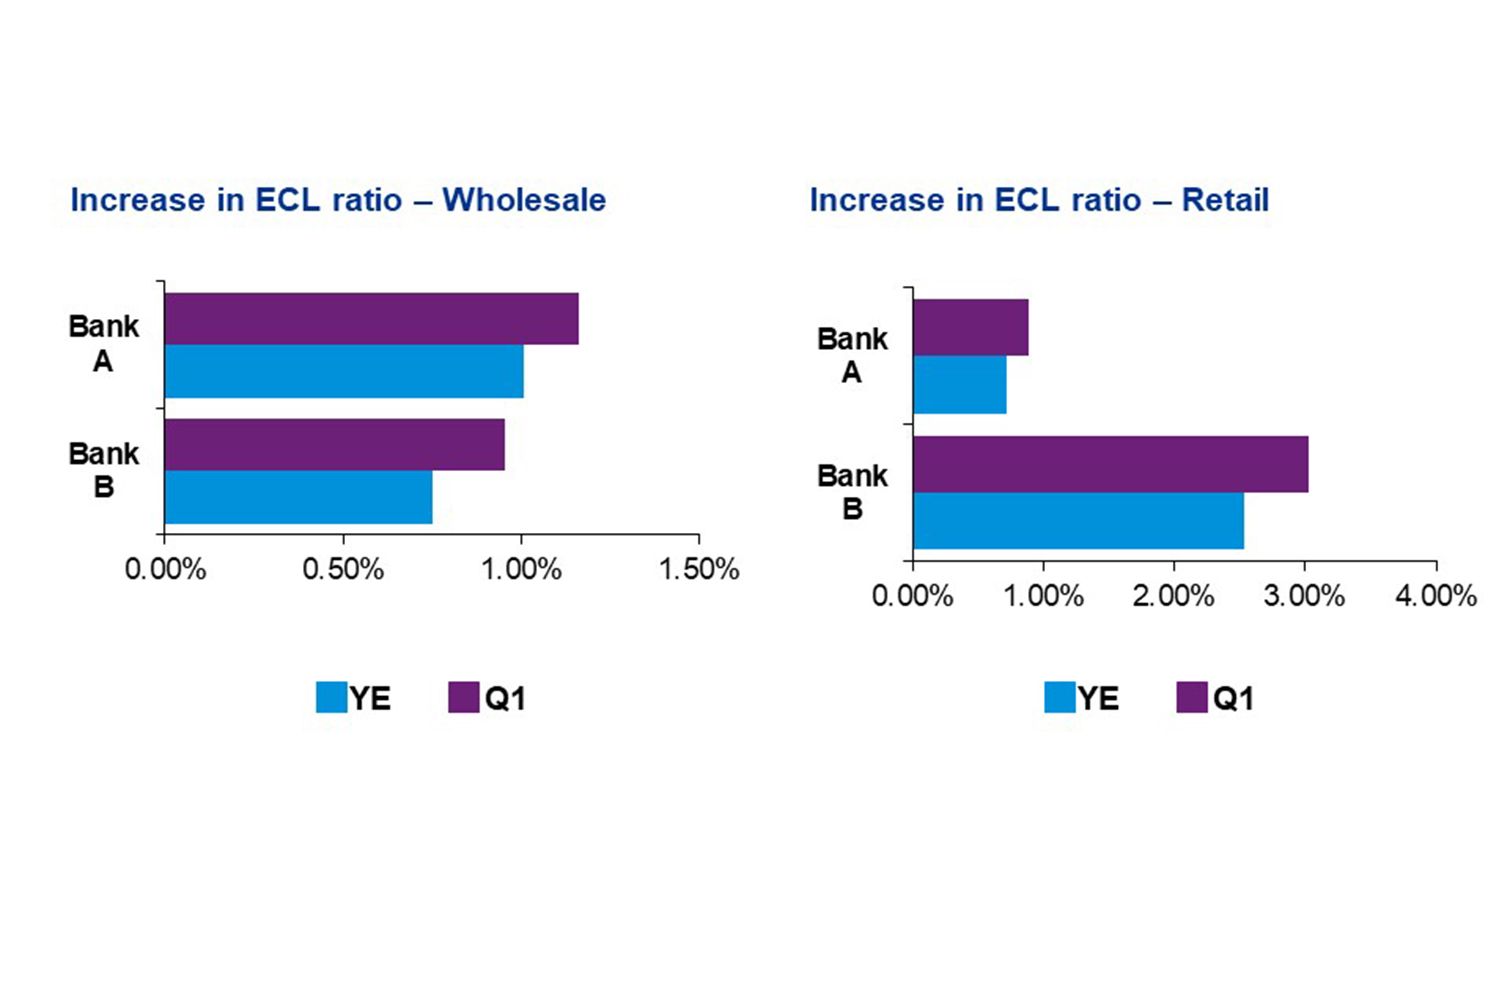 Increase in ECL ratio – Wholesale and Retail